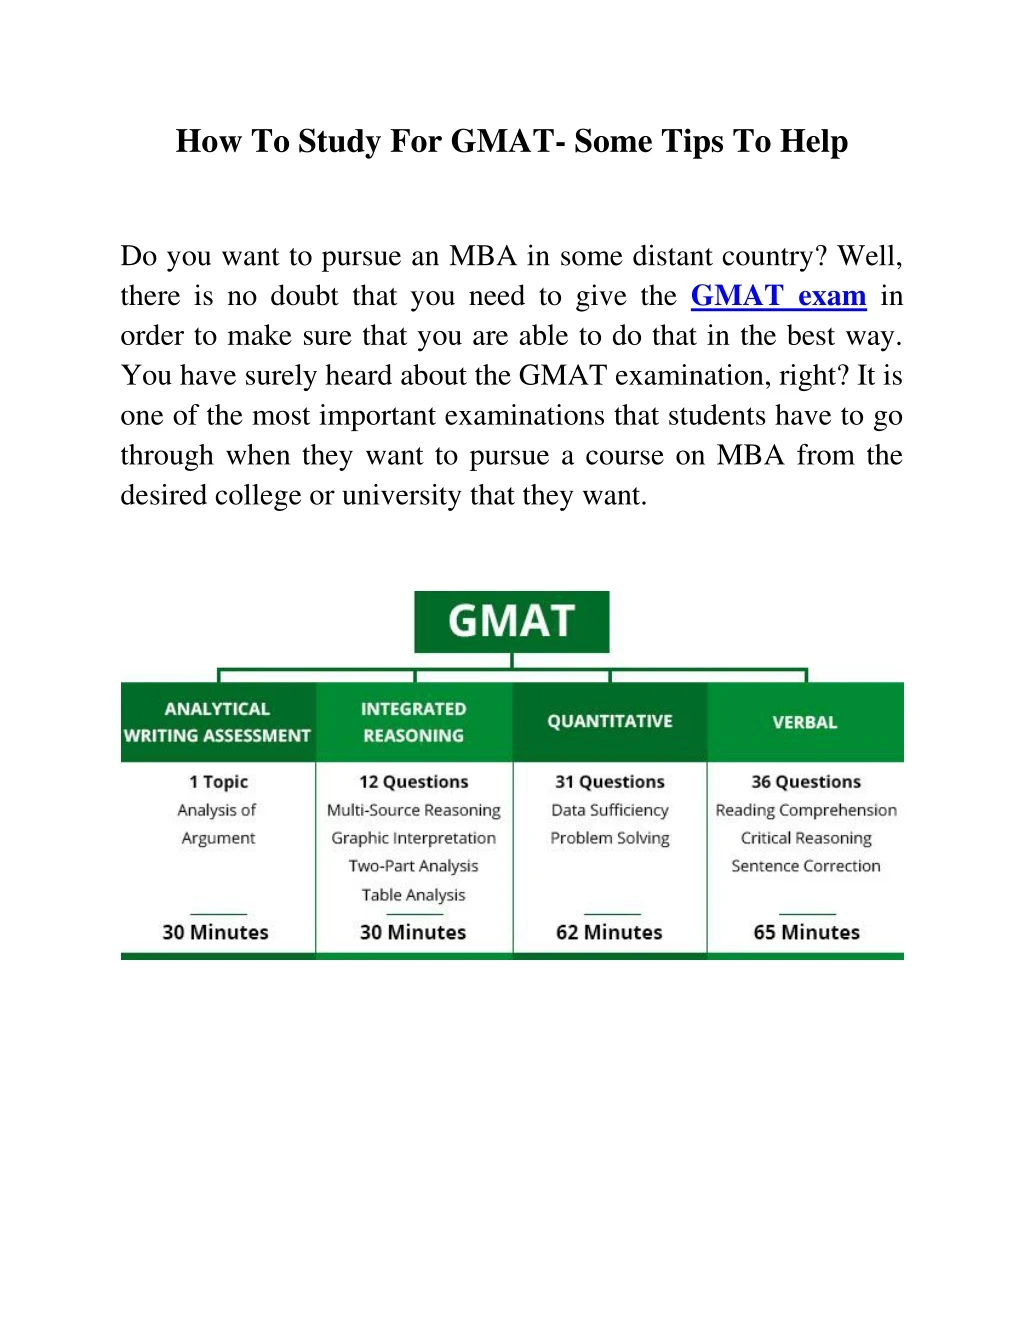 how to study for gmat some tips to help